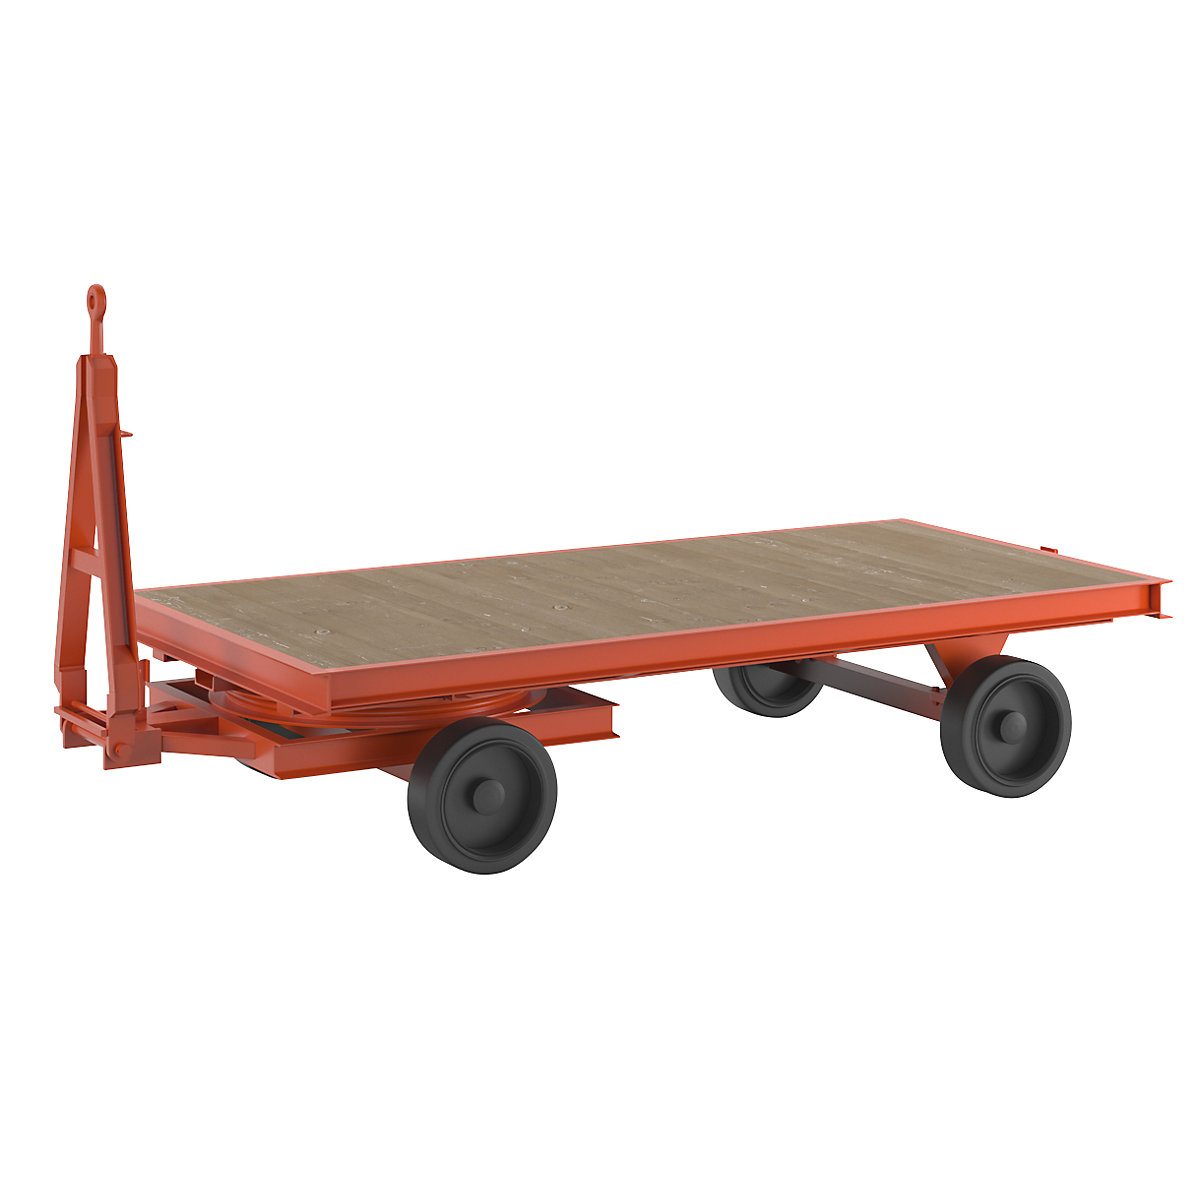 Trailer, 2-wheel turntable steering, max. load 8 t, platform 3.0 x 1.5 m, solid rubber tyres-12